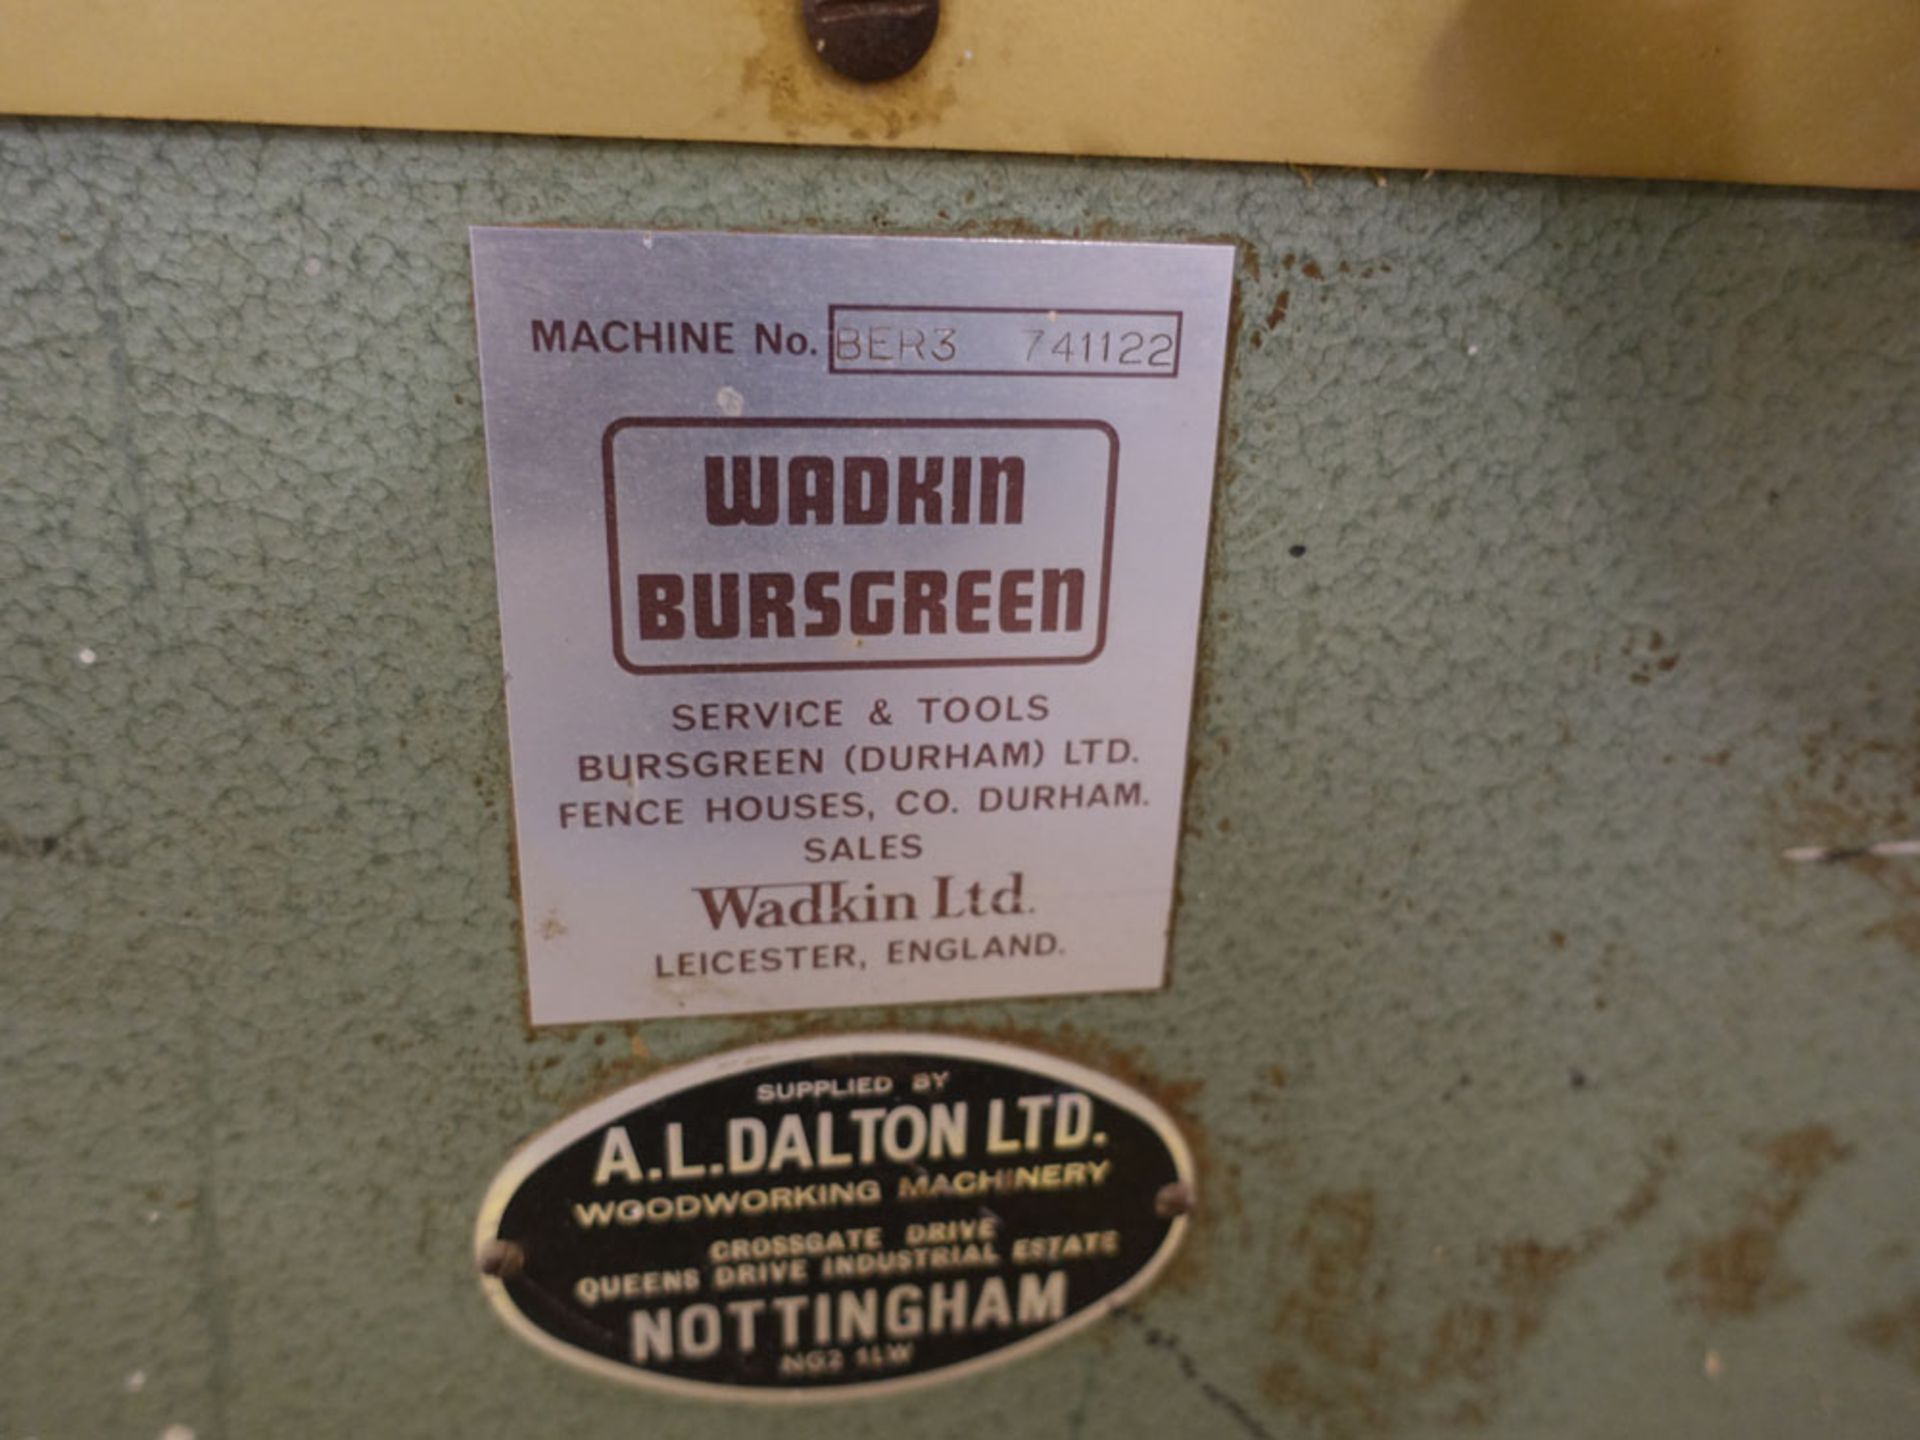 Wadkin Bursgreen spindle molder model BER3, serial no 741122 together with a cabinet containing a - Image 3 of 5